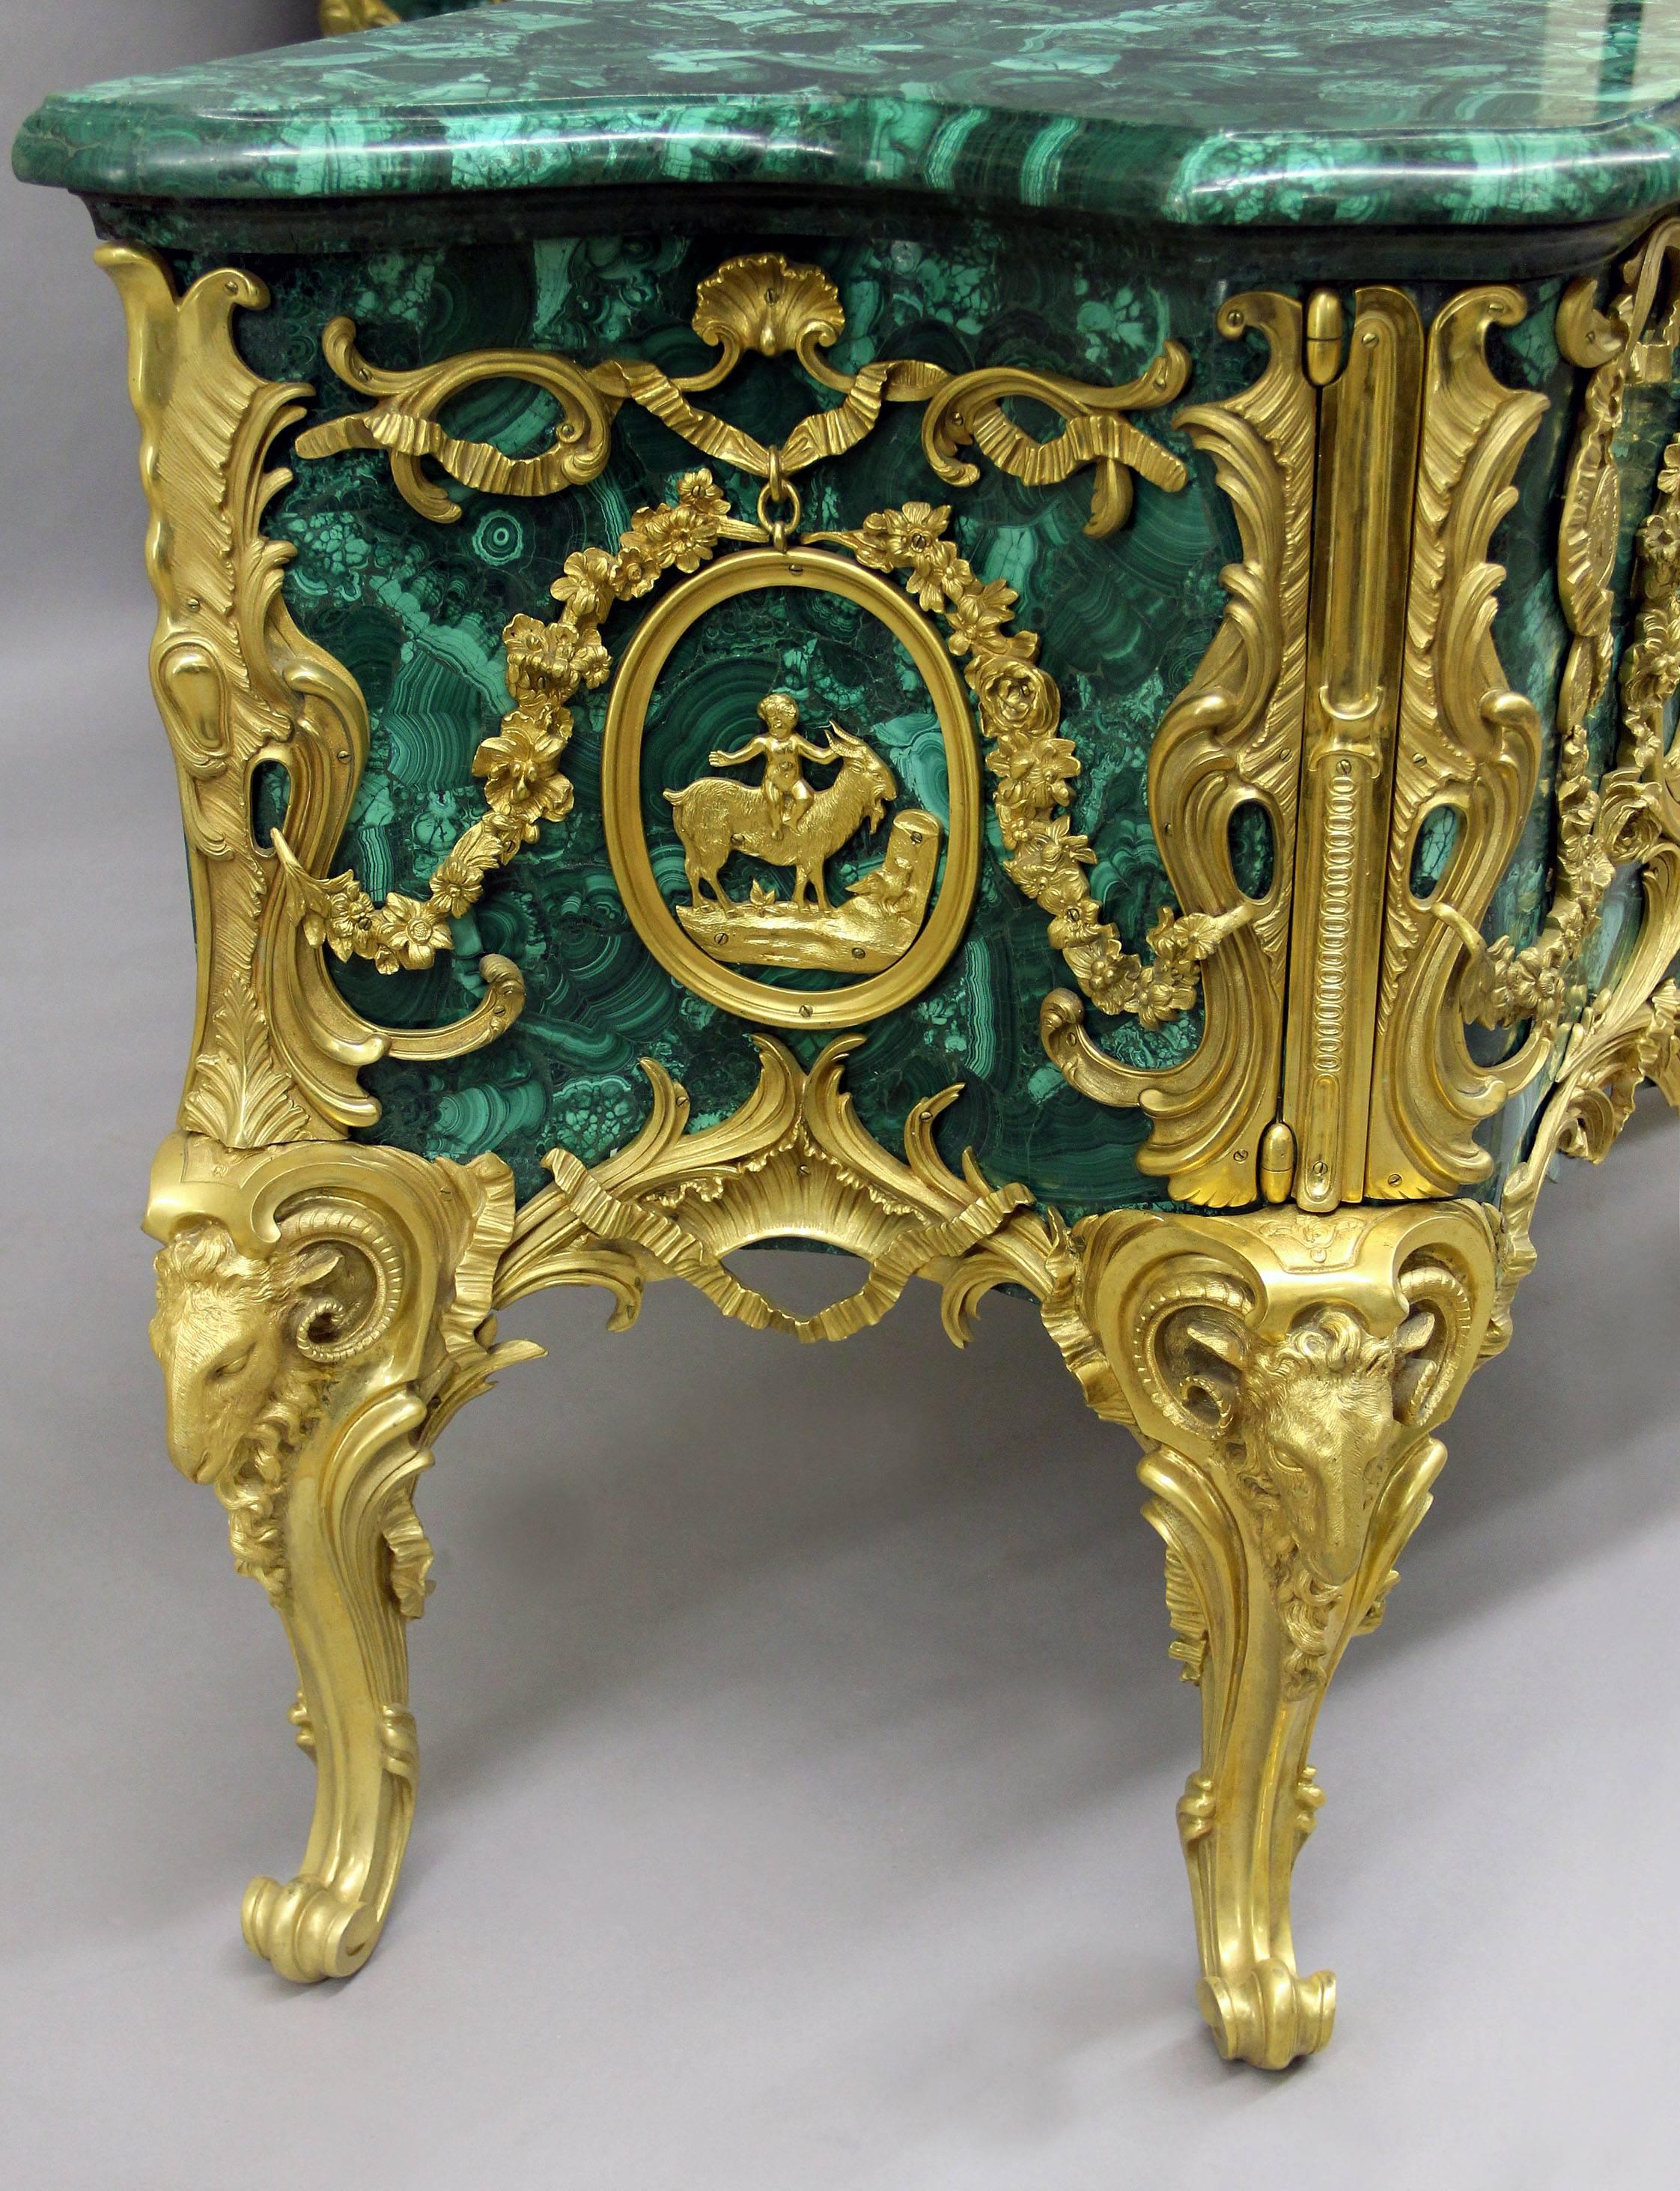 Pair of Late 19th-Early 20th Century Gilt Bronze-Mounted Malachite Commodes 1